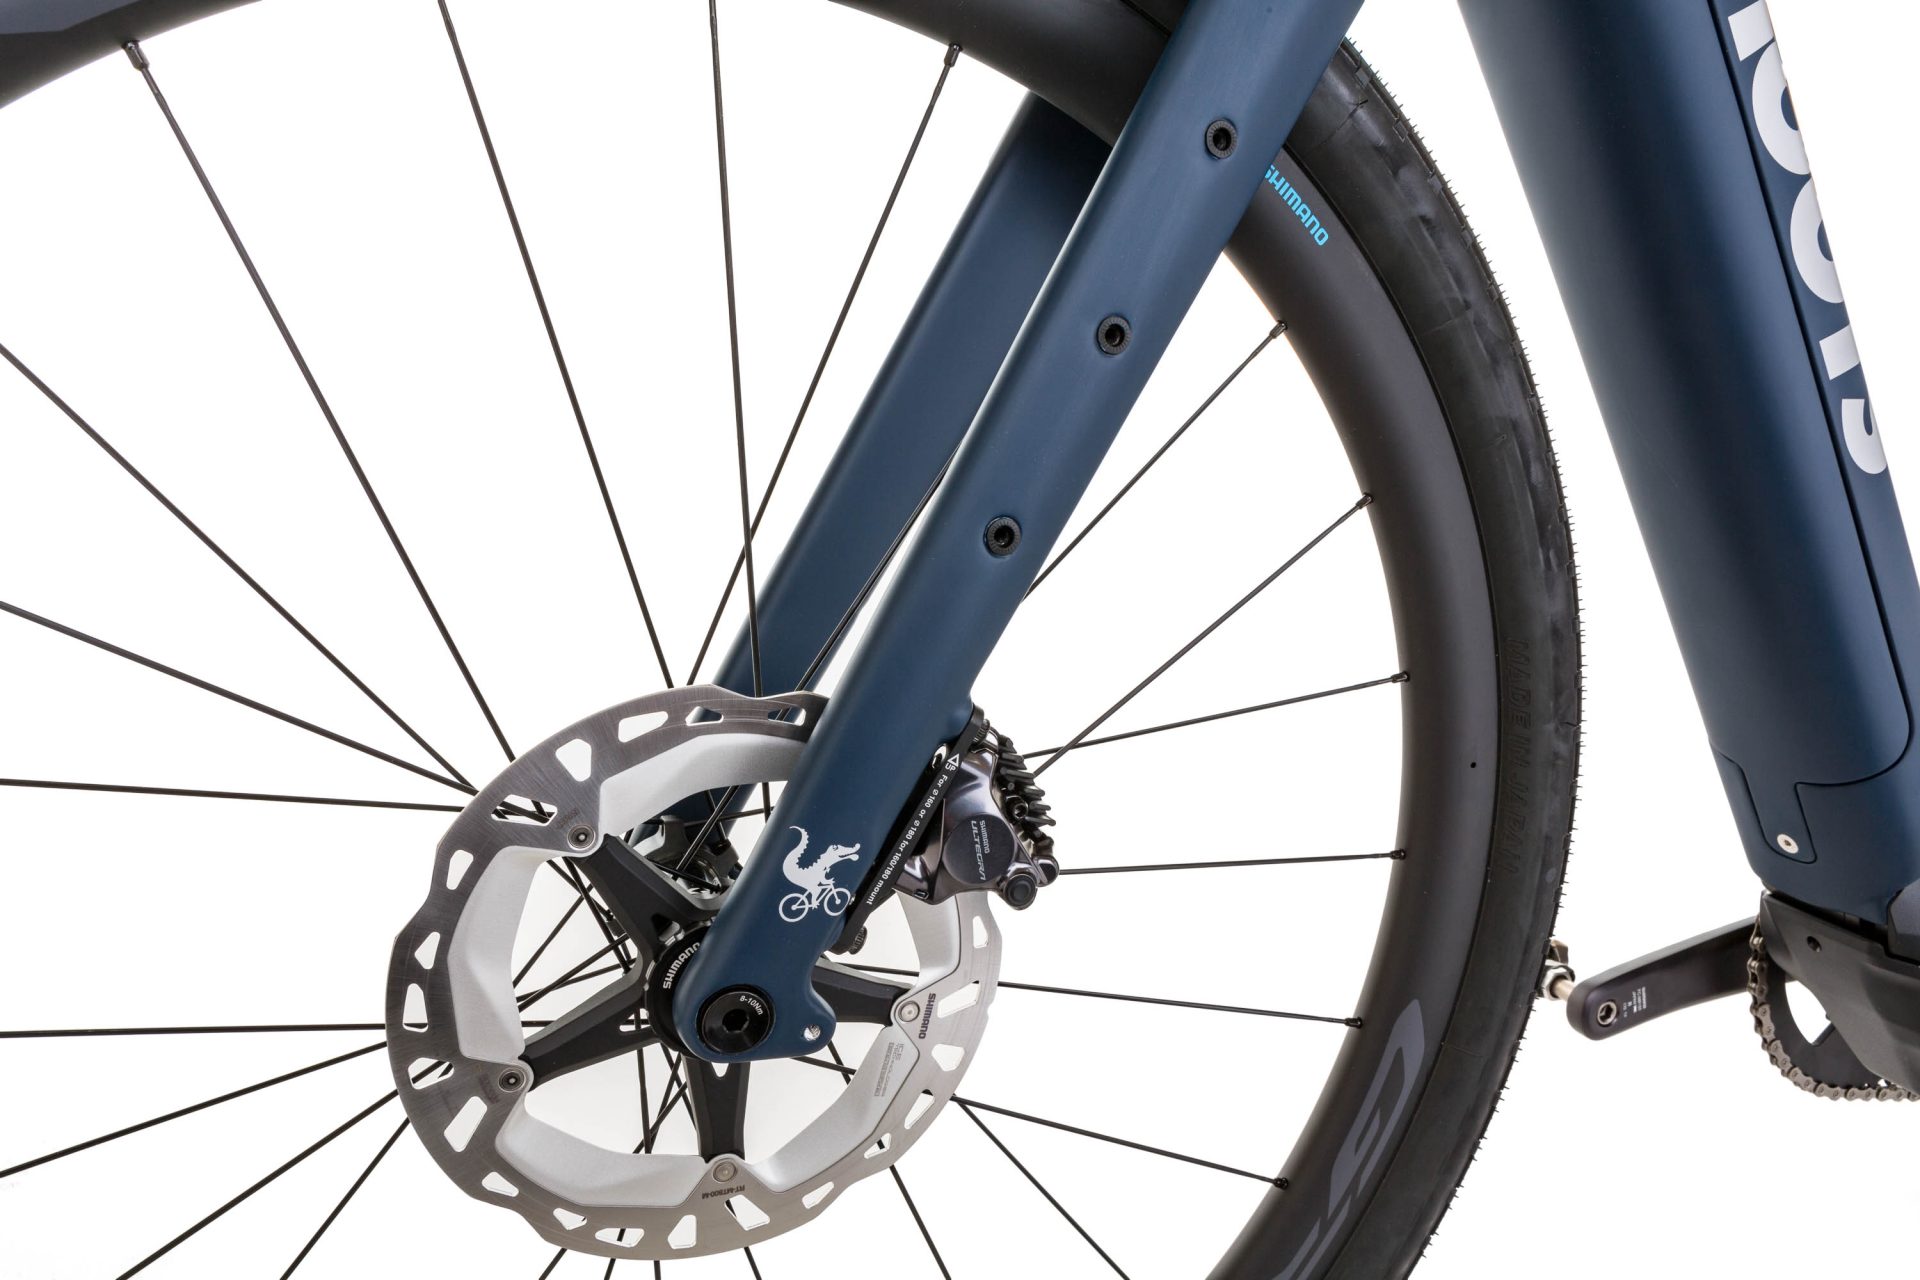 Fork and front brake of Moots Express e-gravel bike